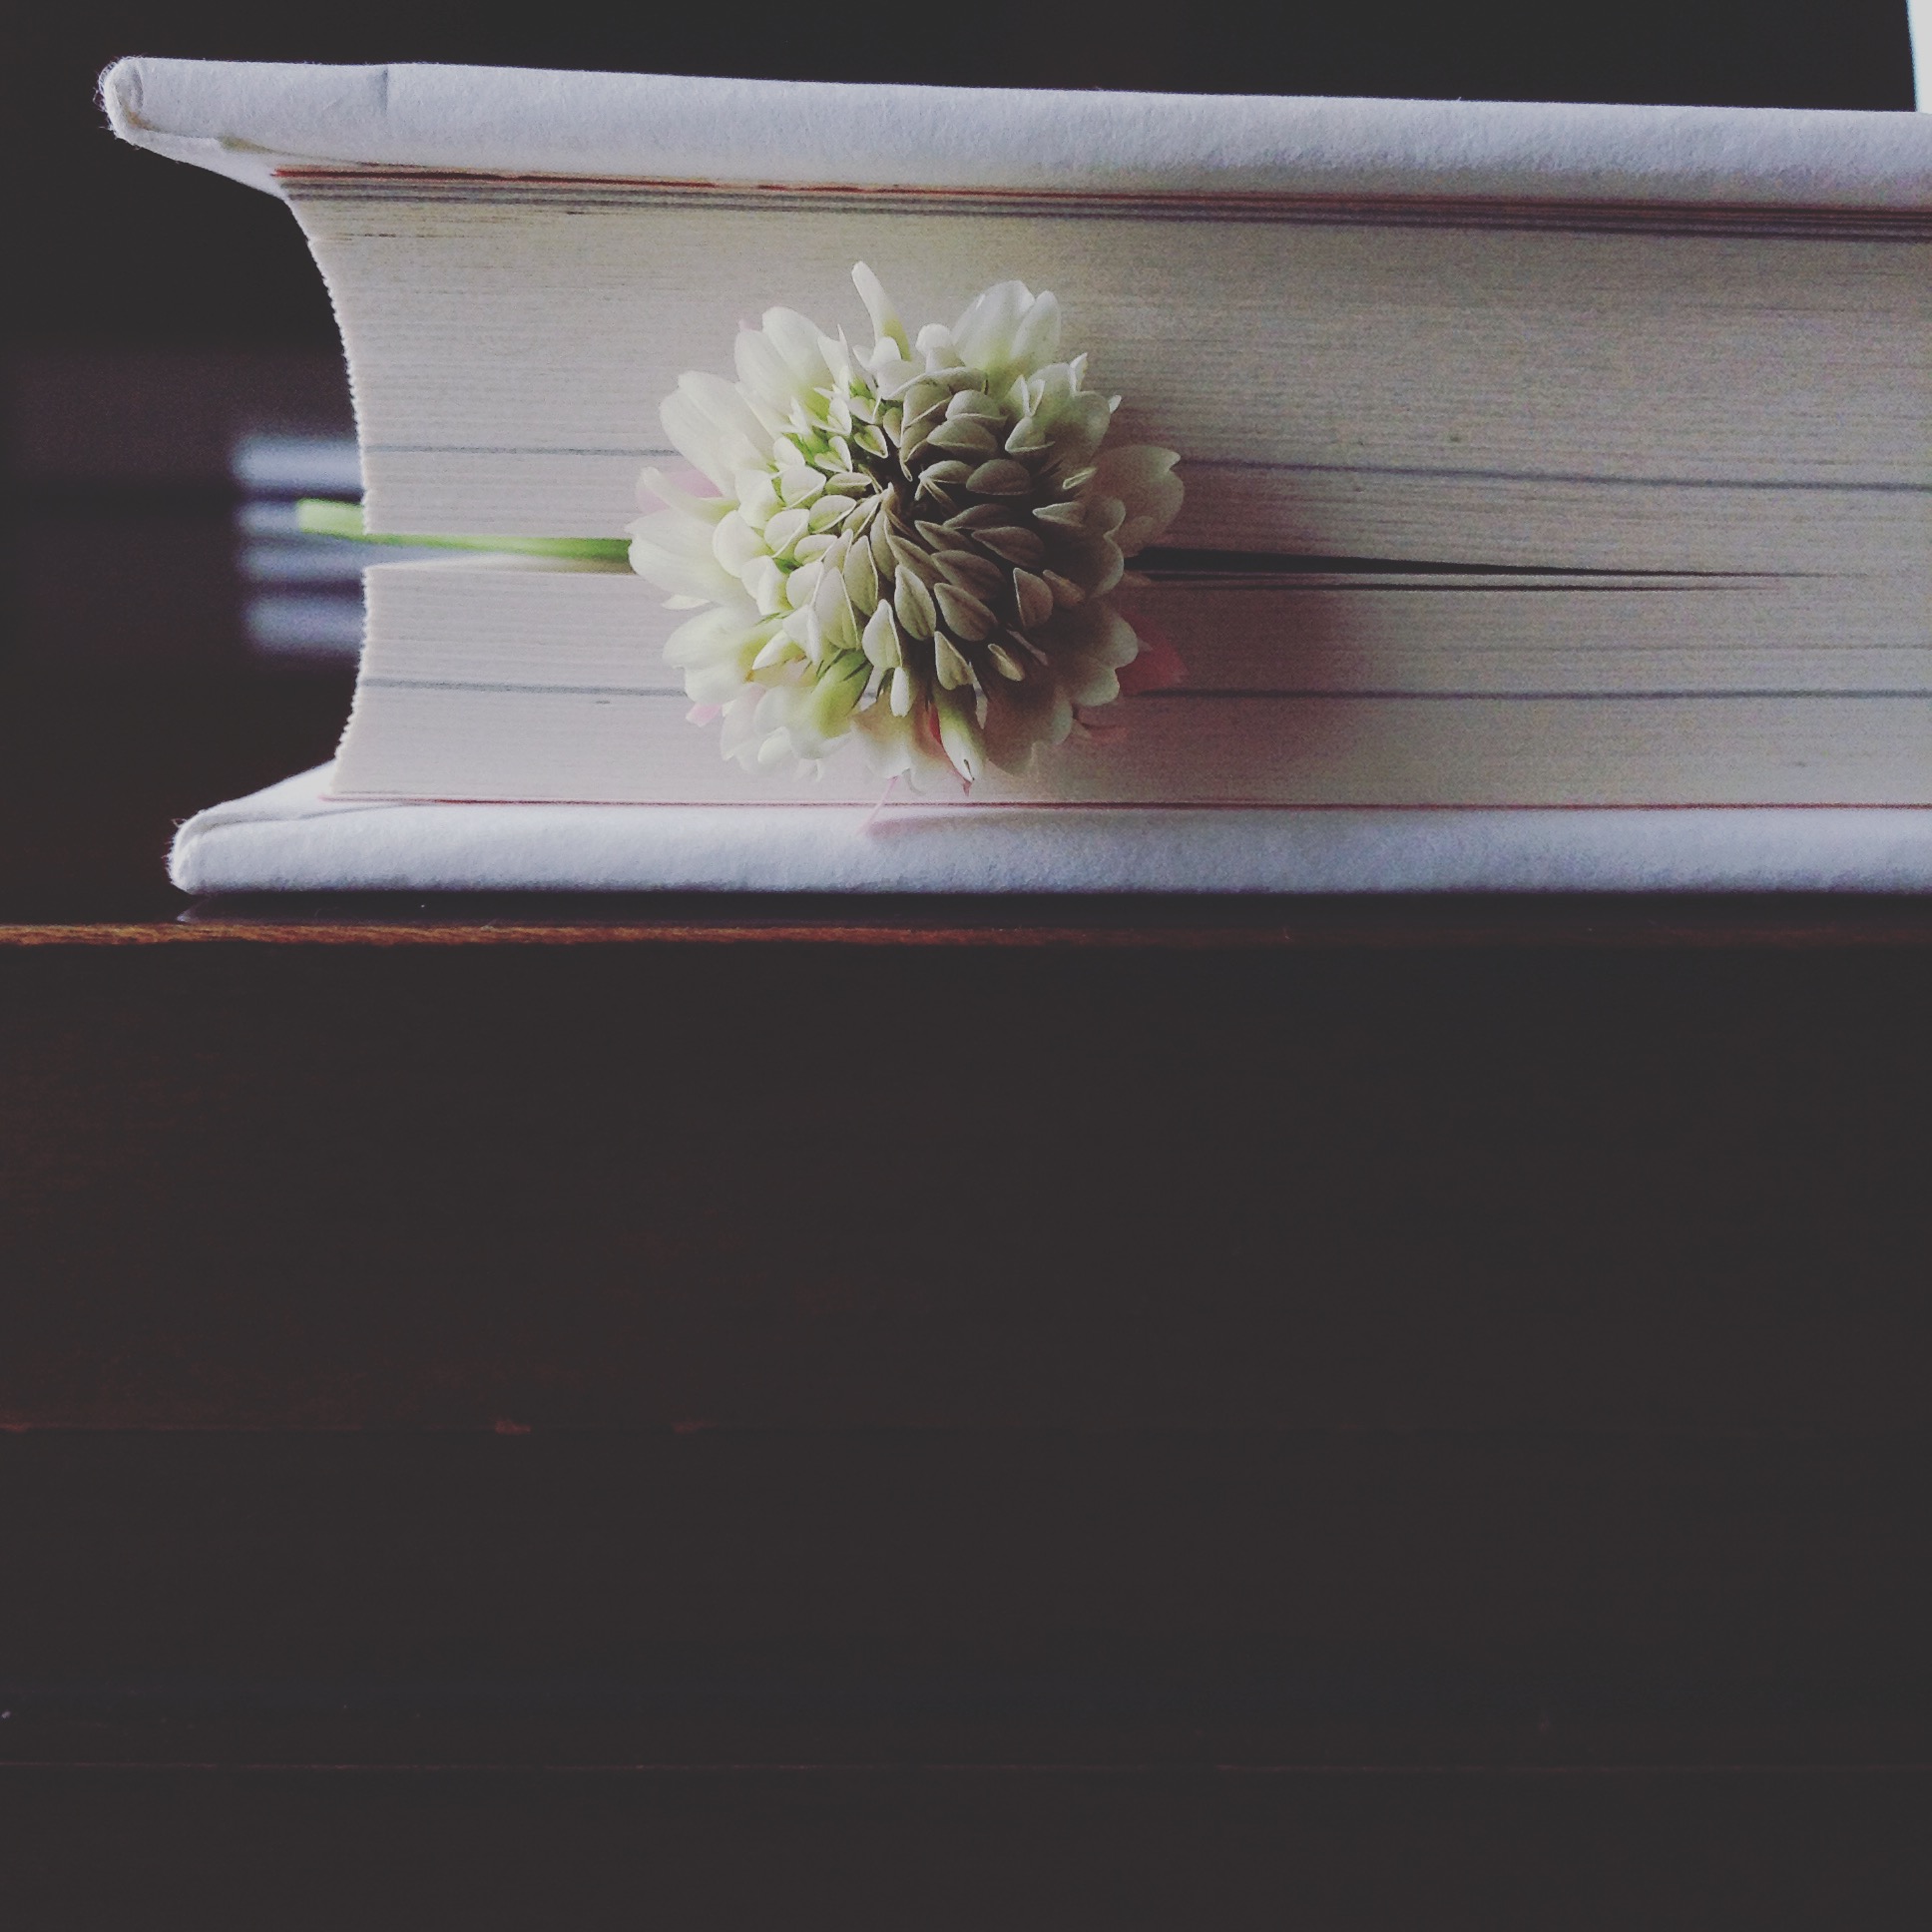 Book and Flower